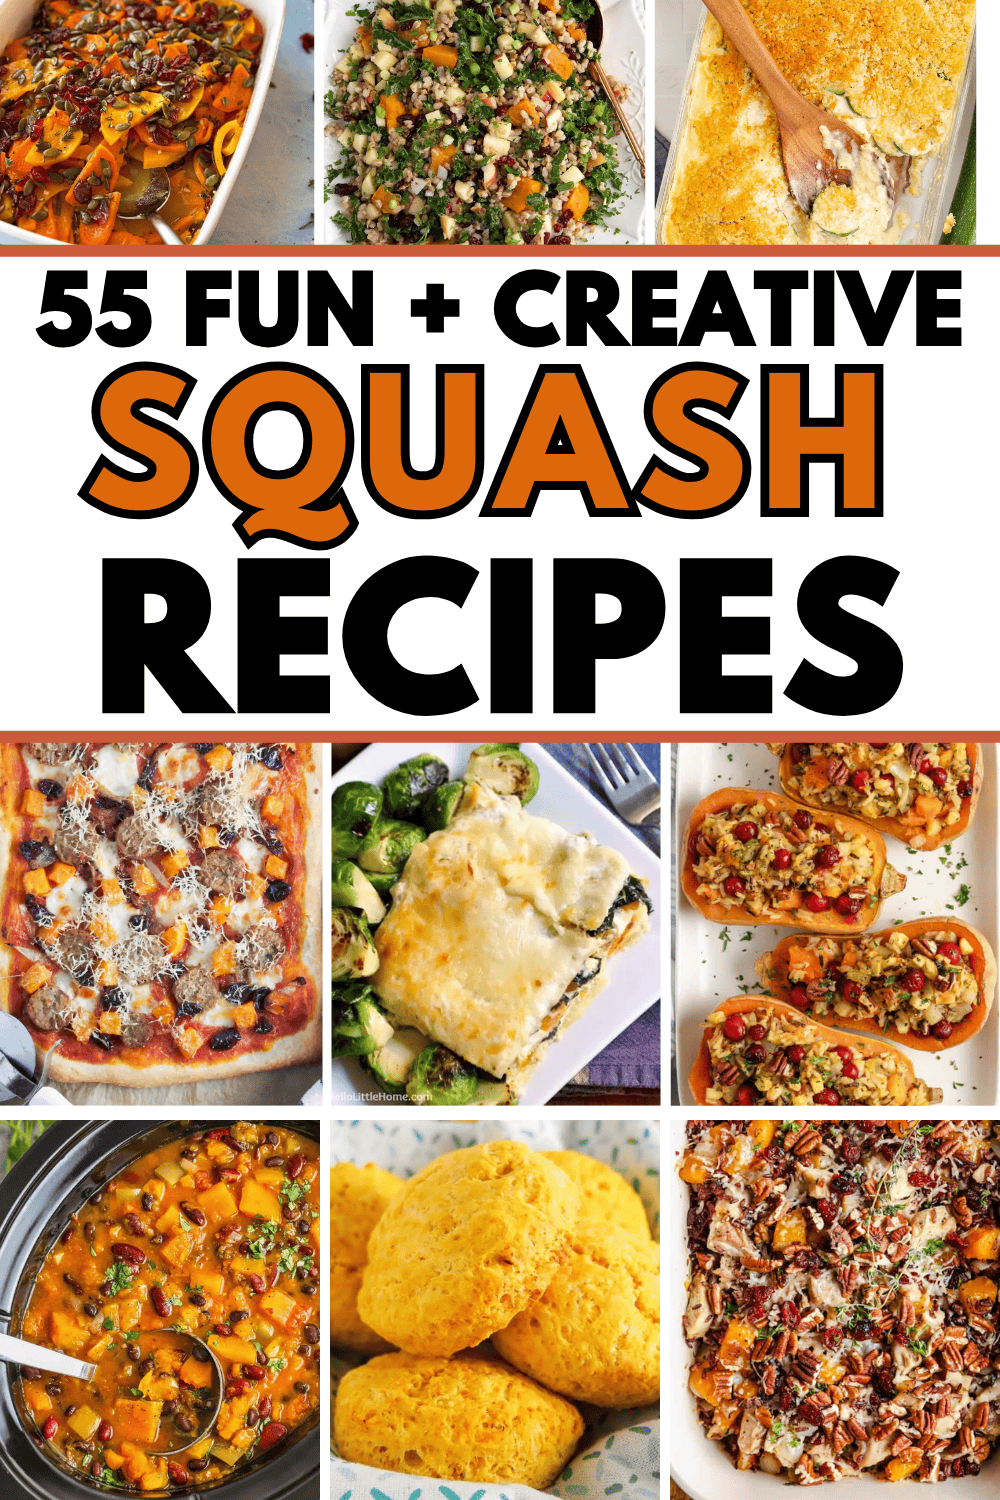 Easy squash recipes! The best quick and healthy spaghetti squash, zucchini, butternut squash and acorn squash recipes. From roasted in the air fryer to baked in oven to crockpot casserole these are easy things to make with squash and zucchini. Perfect for dinner in summer, fall, or for Thanksgiving. Healthy squash sides recipes, fall butternut squash recipes, squash recipes yellow, squash recipes acorn, squash recipes zucchini, dinner ideas squash, stuffed squash recipes, easy vegetarian meals.